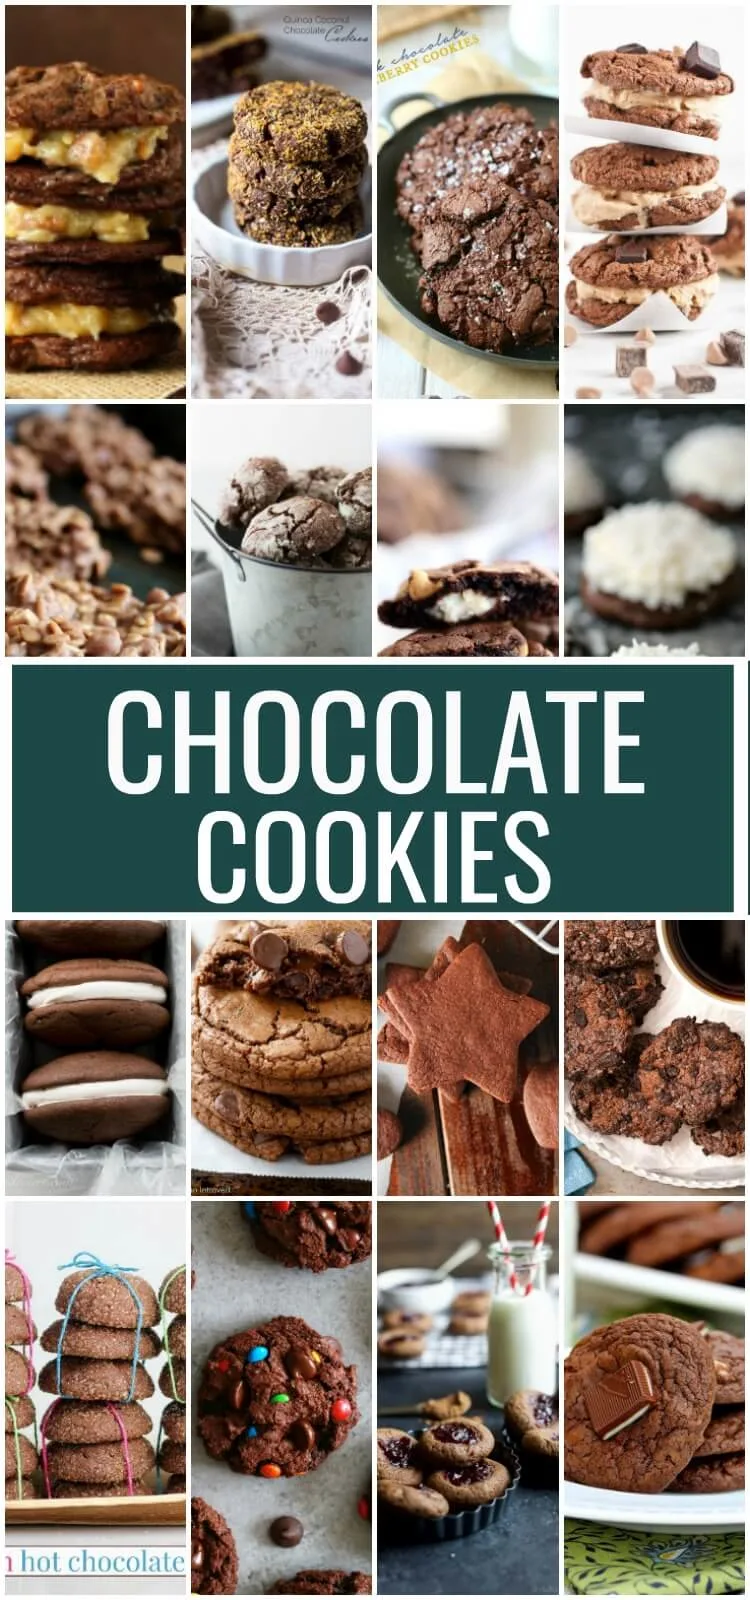 20 Chocolate Cookie Recipes. These are the best chocolate cookie recipes. Soft and chewy chocolate cookies that will make your mouth water! 